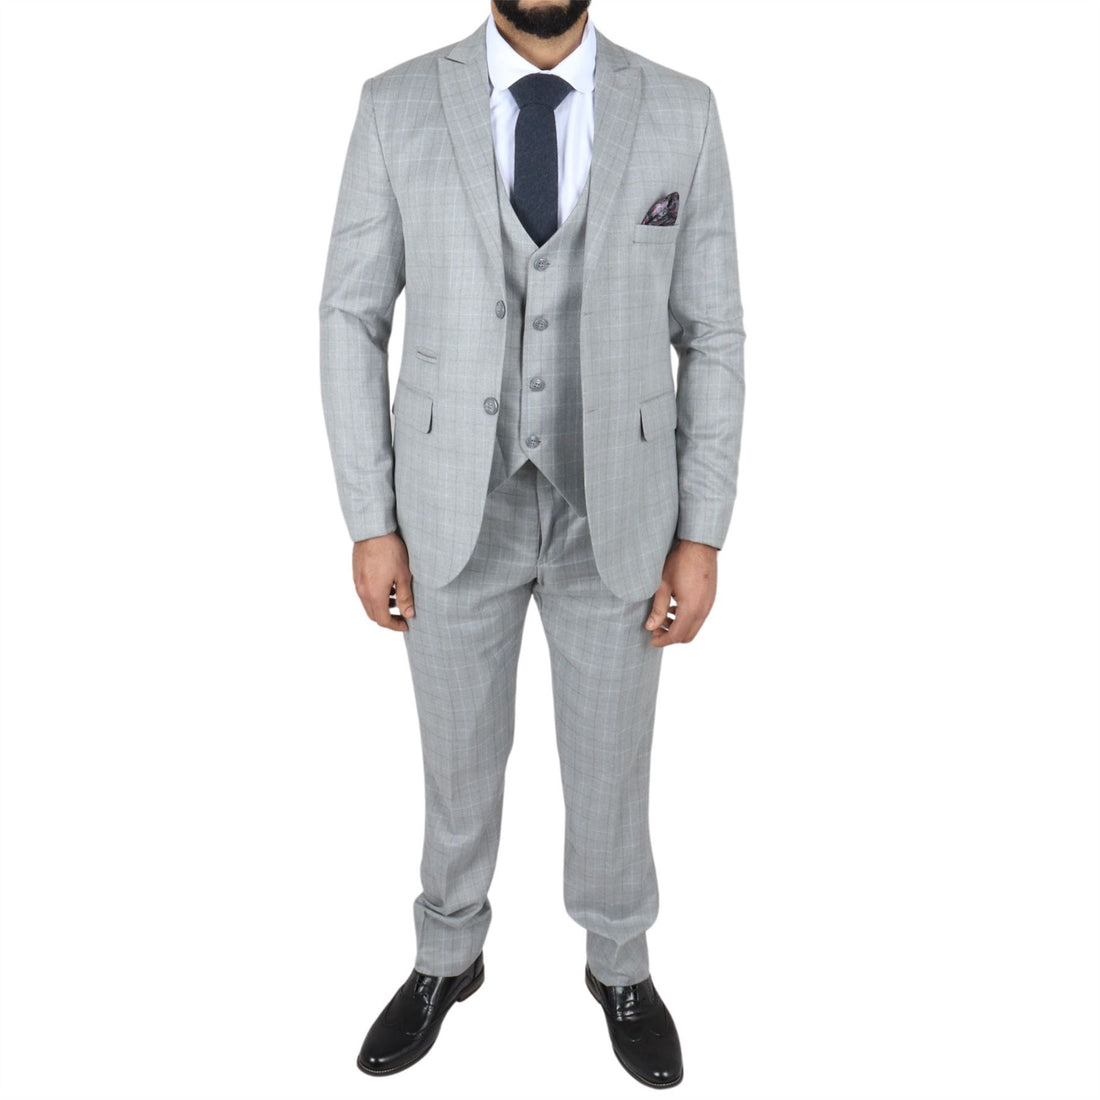 Men's Light Grey Suit Prince Of Wales Check Tailored Fit 3 Piece Formal Dress